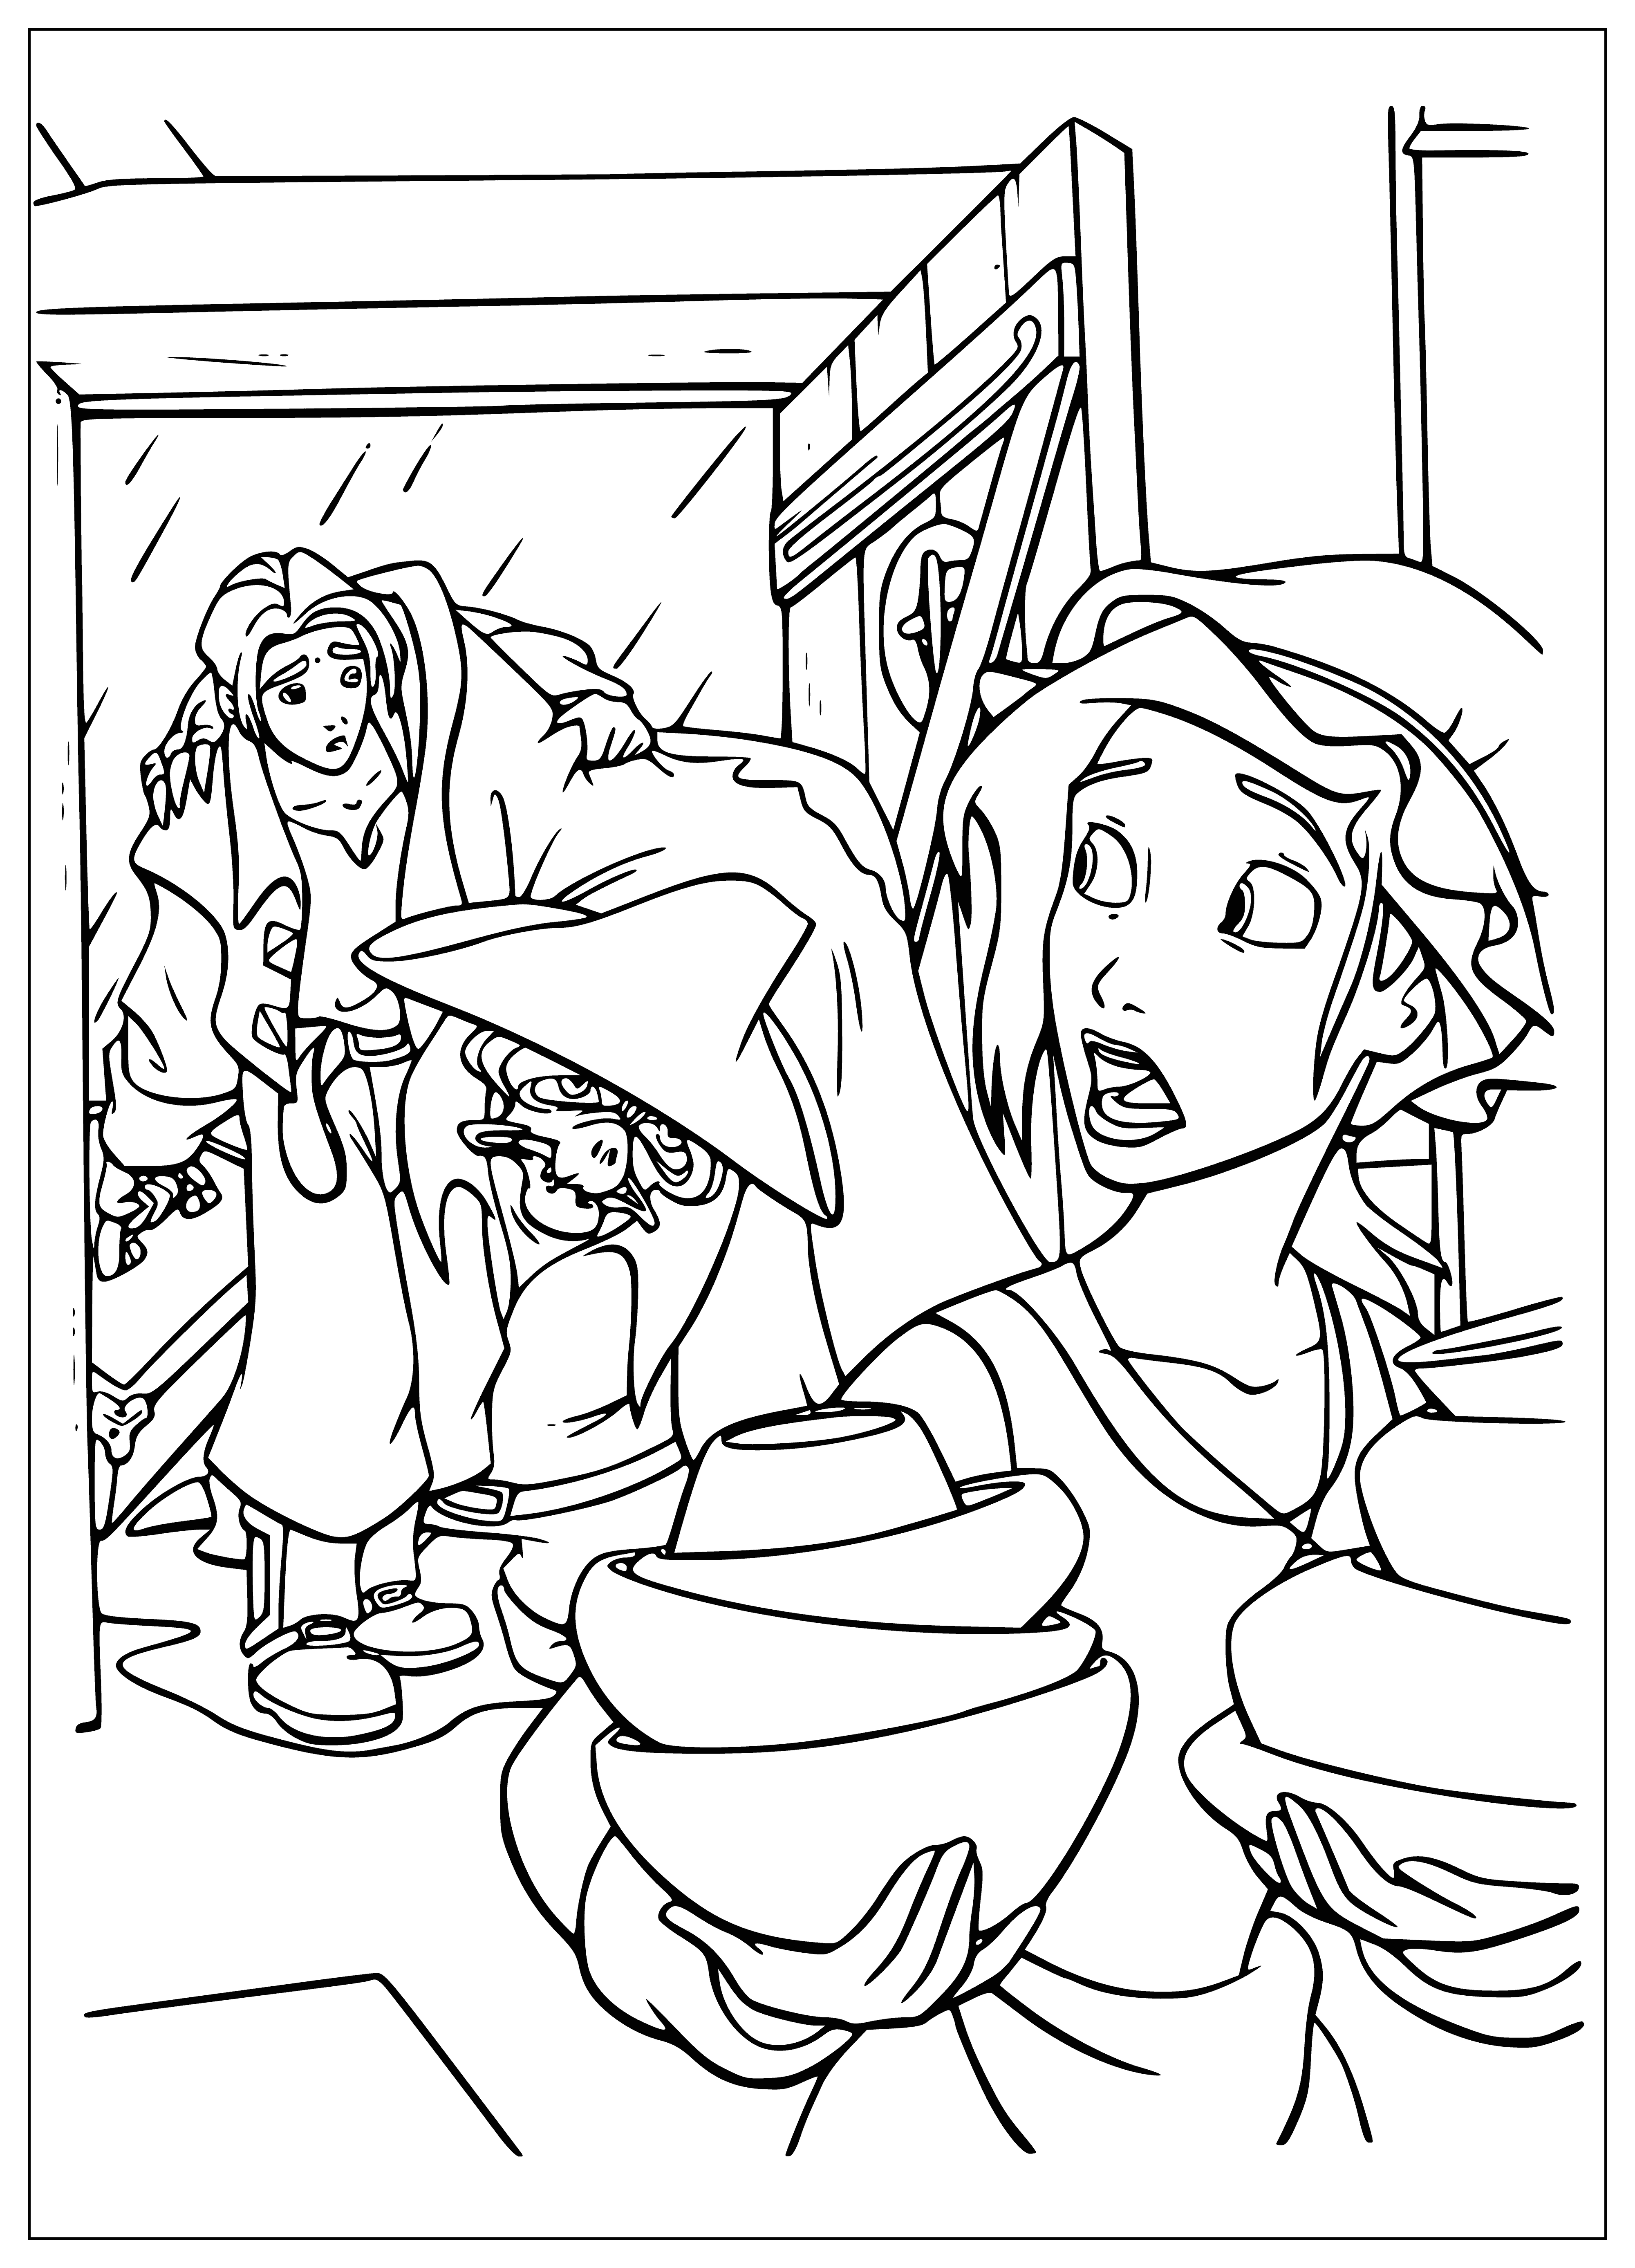 coloring page: An old sailor looks at a yellow/brown treasure map, wearing blue shirt/red hat, with a sword in his belt.